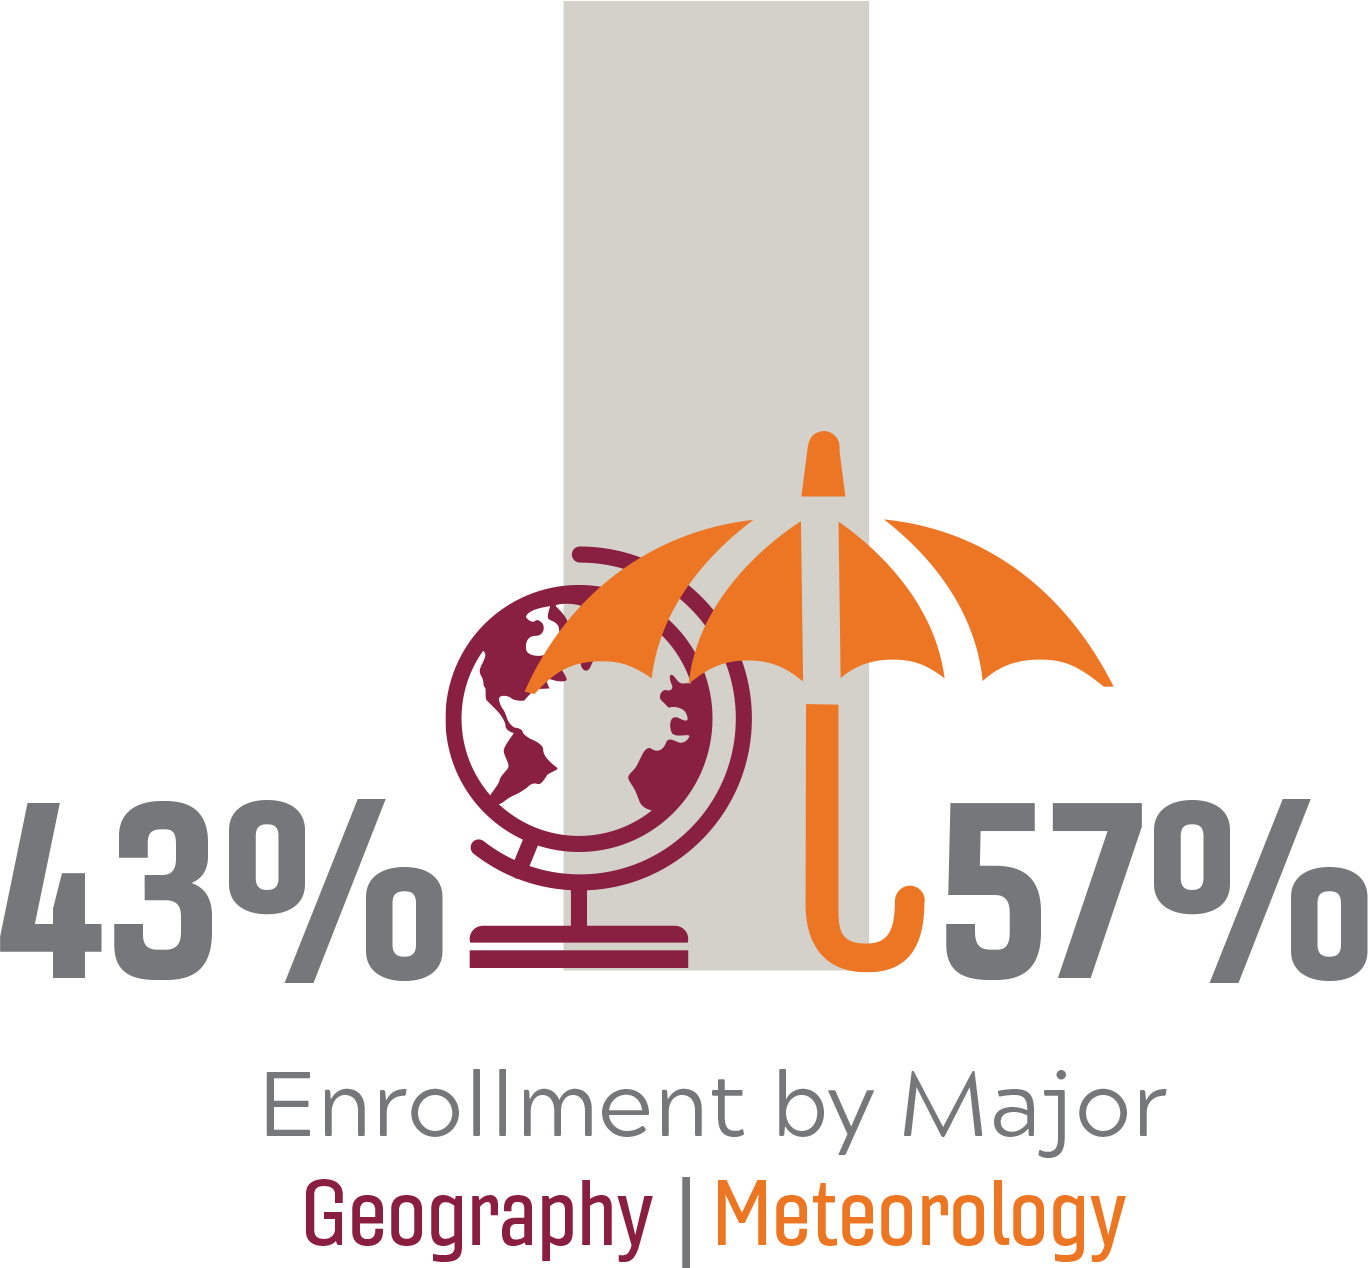 Enrollment by Major: 17% Geography, 57% Meteorology.